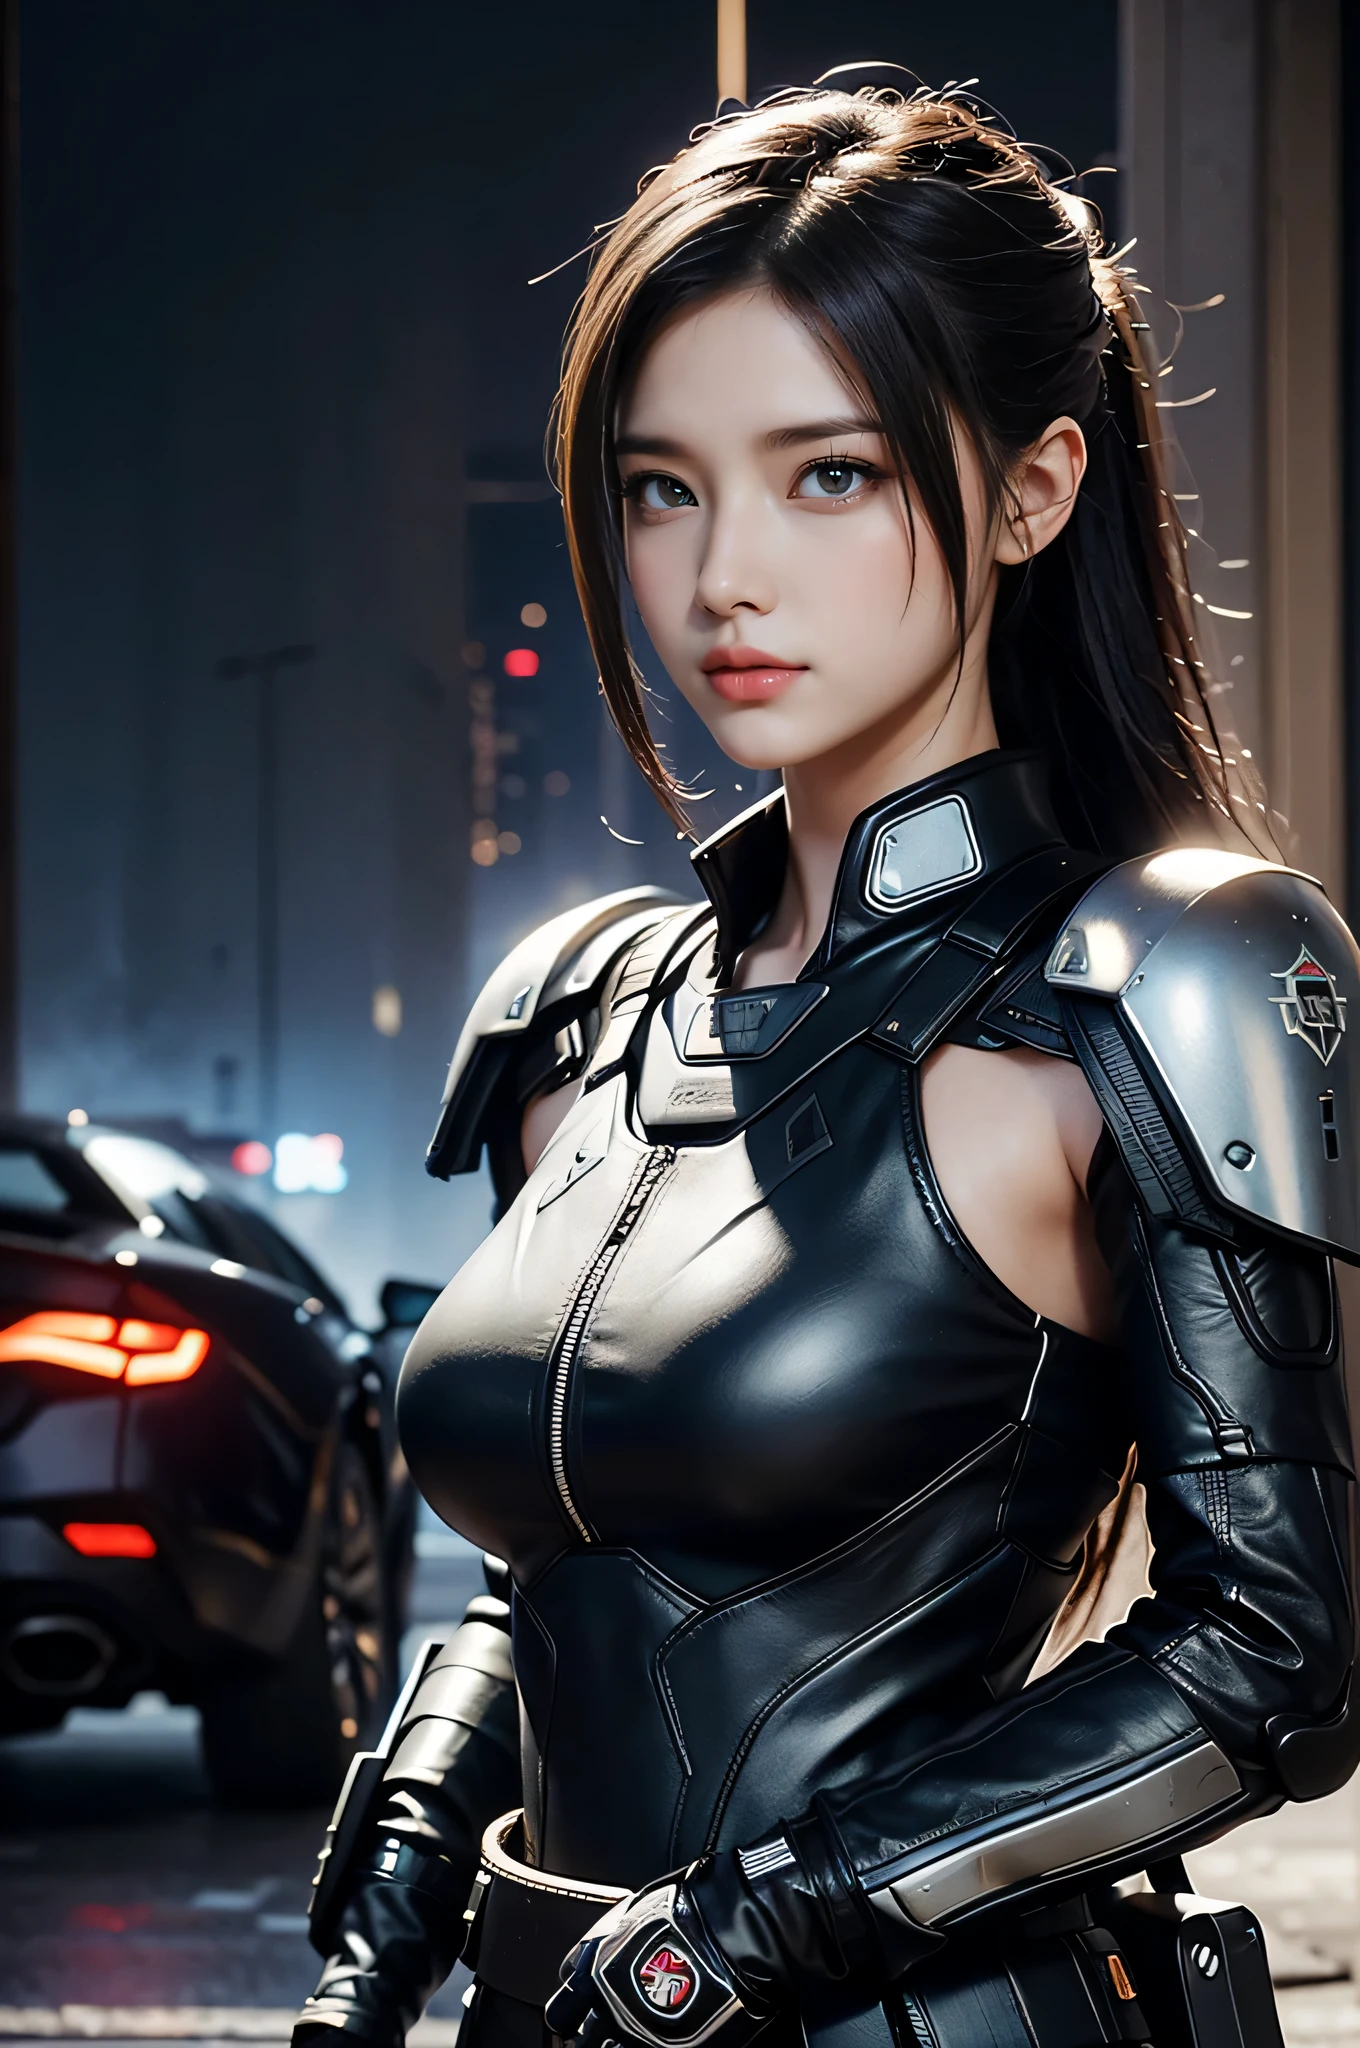 Game art，The best picture quality，Highest resolution，8K，((A bust photograph))，((Portrait))，(Rule of thirds)，Unreal Engine 5 rendering works， (The Girl of the Future)，(Female Warrior)，22 year old girl，(Long hair casual)，(Future-style military wear，A beautiful eye full of detail)，(Big breasts)，(Eye shadow)，Elegant and charming，Smile，(frown)，(Battle suits of the future，Features of Cyberpunk Fighter Clothing，Joint Armor，The dress has a fine pattern and badge)，Cyberpunk warriors，((action game character))，futuristic style， photo poses，street background，Movie lights，Ray tracing，Game CG，((3D Unreal Engine))，OC rendering reflection pattern